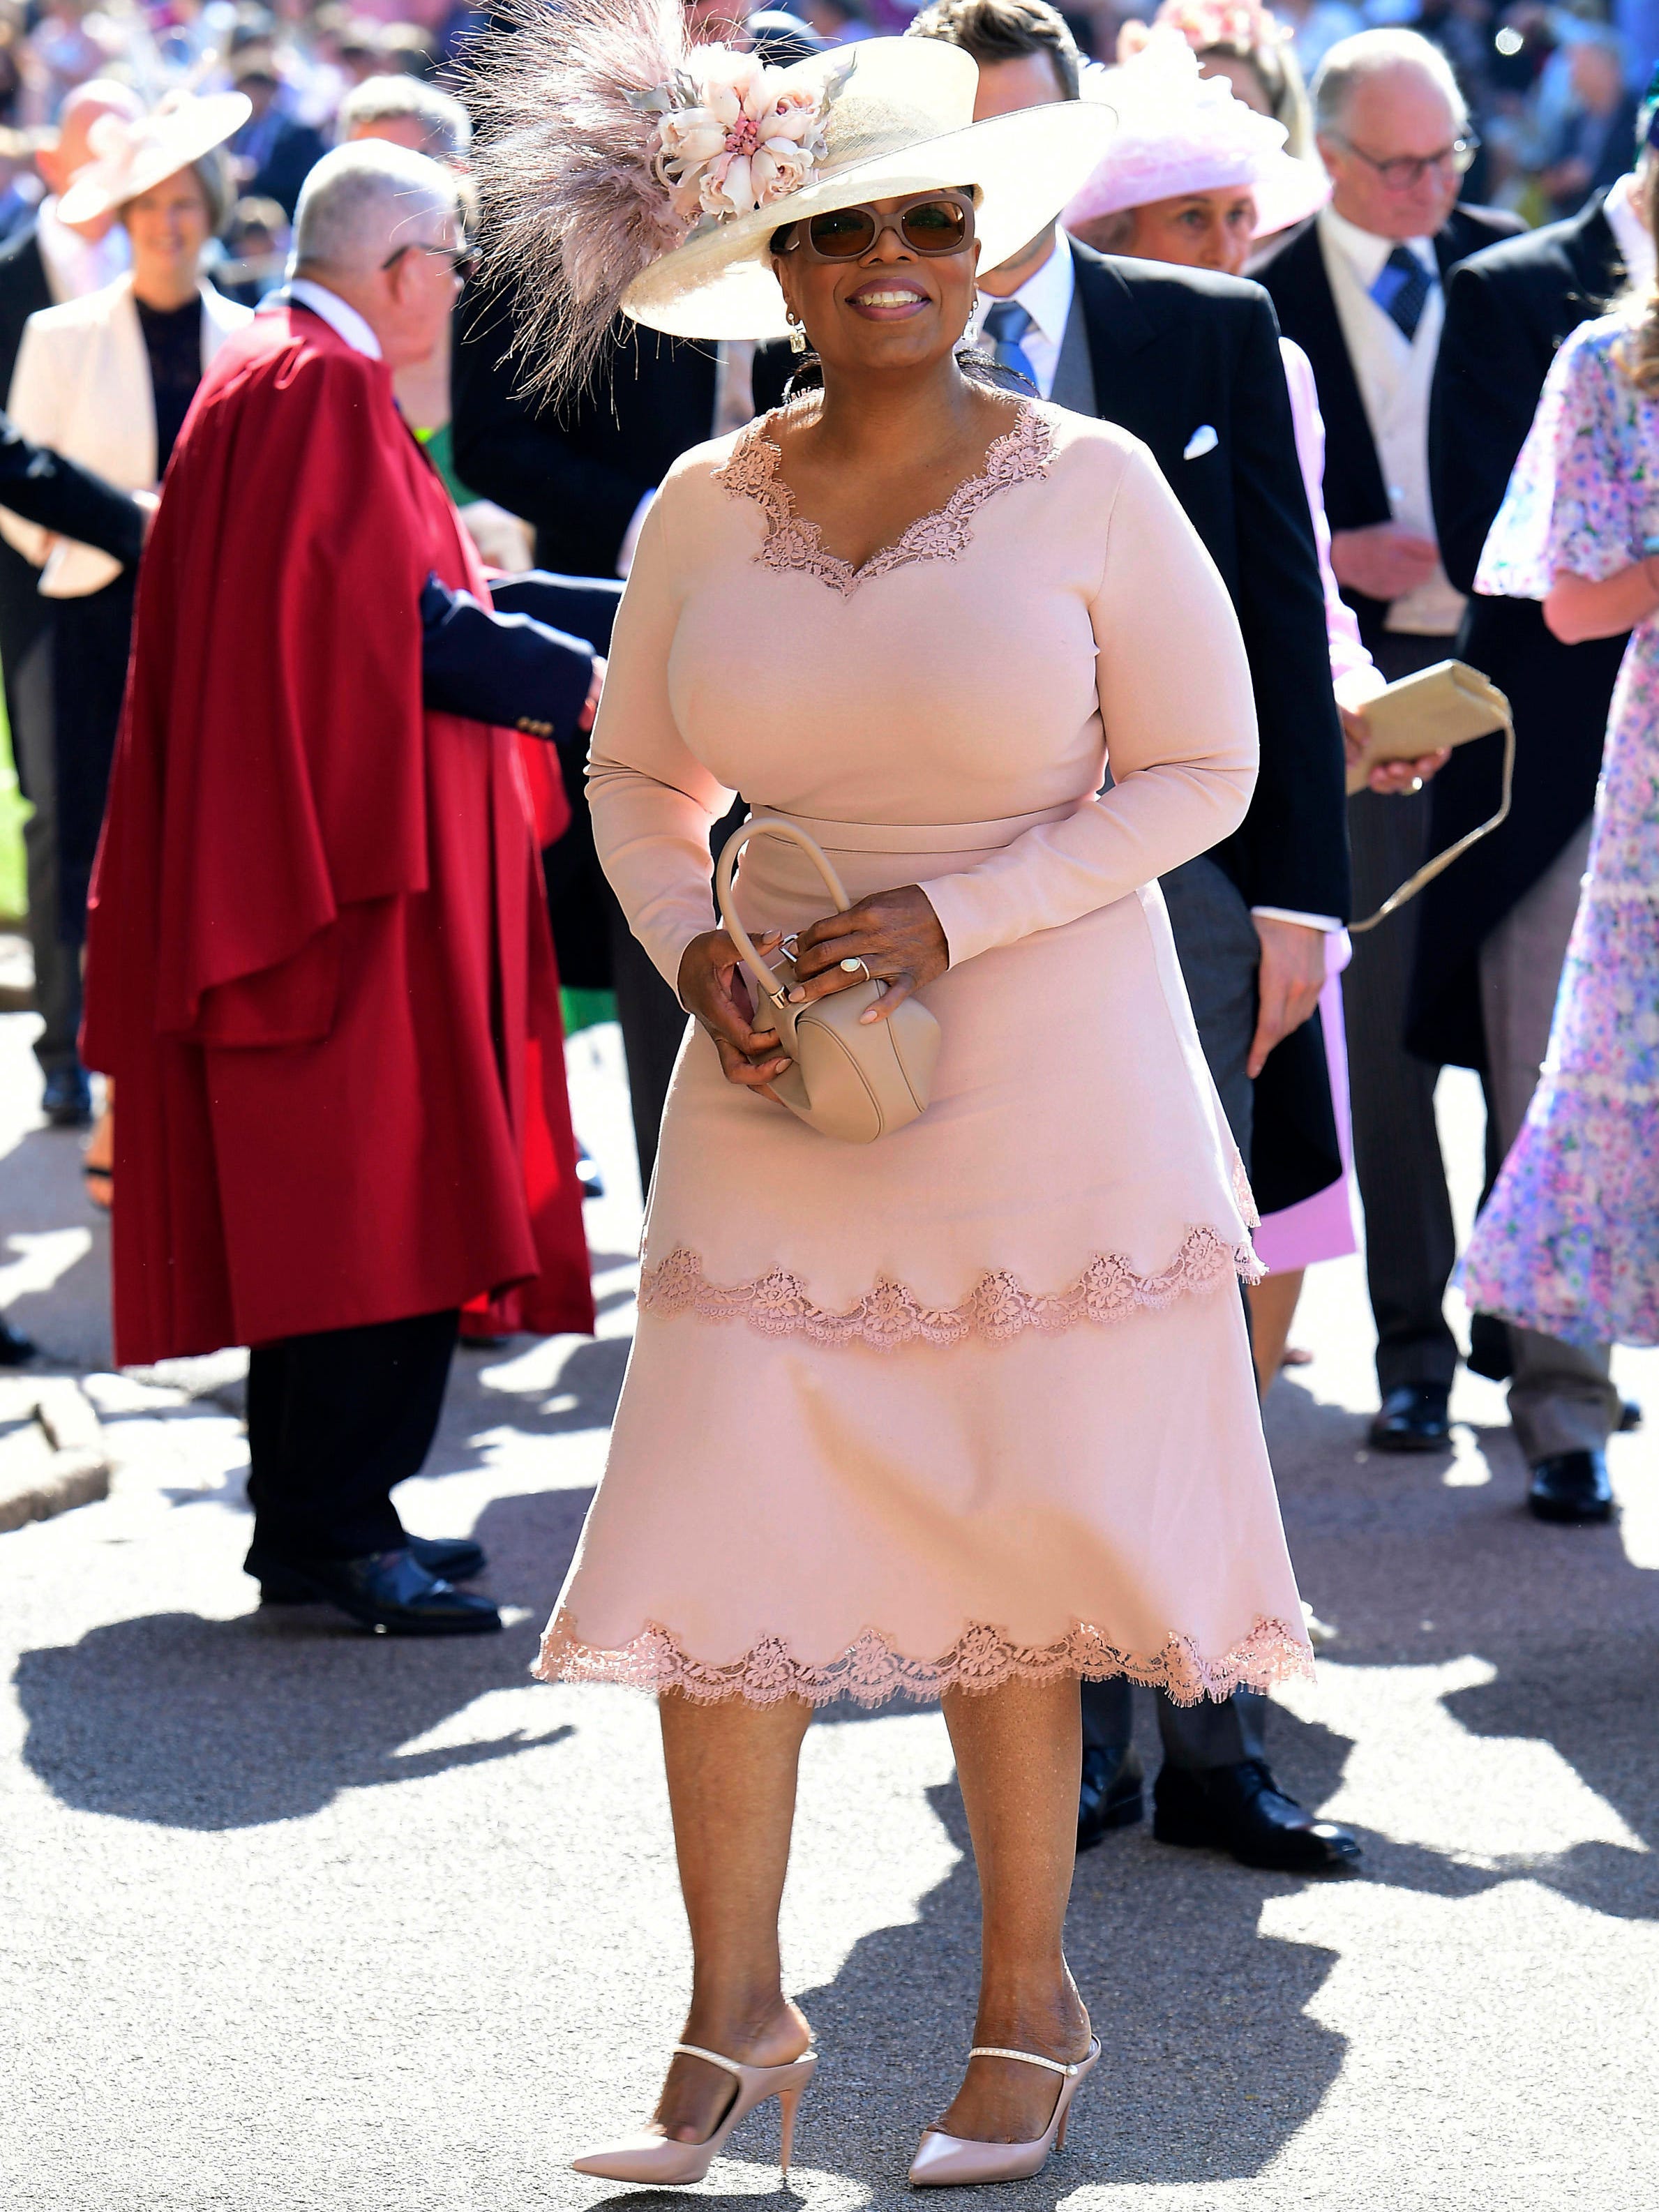 Oprah Almost Had A Fashion Faux Pas At The Royal Wedding